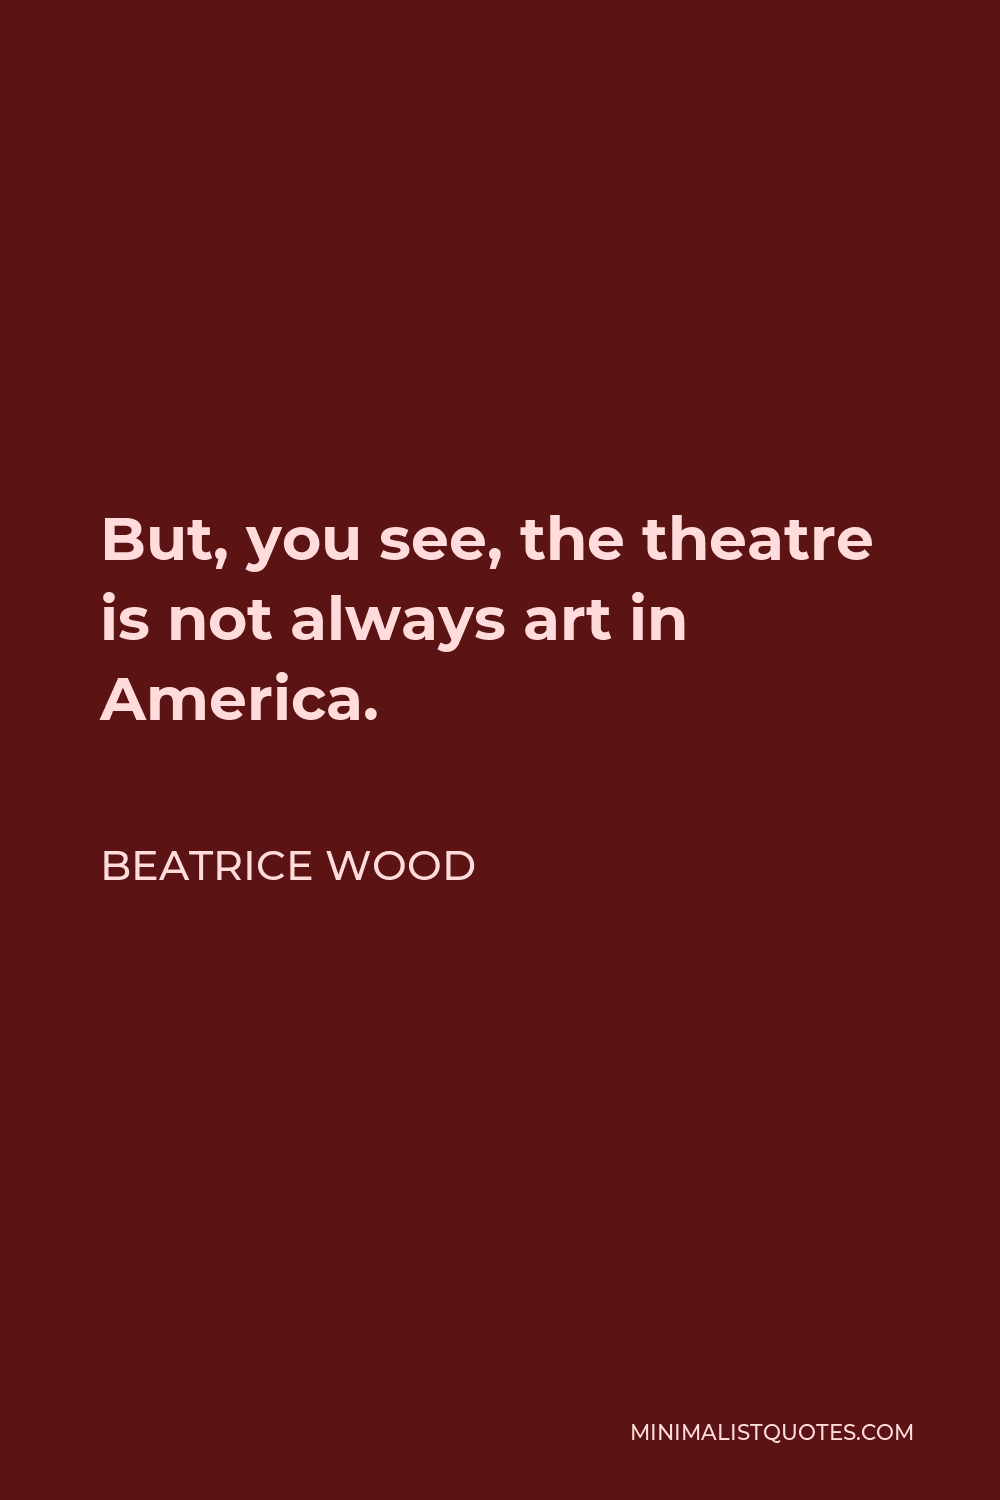 Beatrice Wood Quote - But, you see, the theatre is not always art in America.